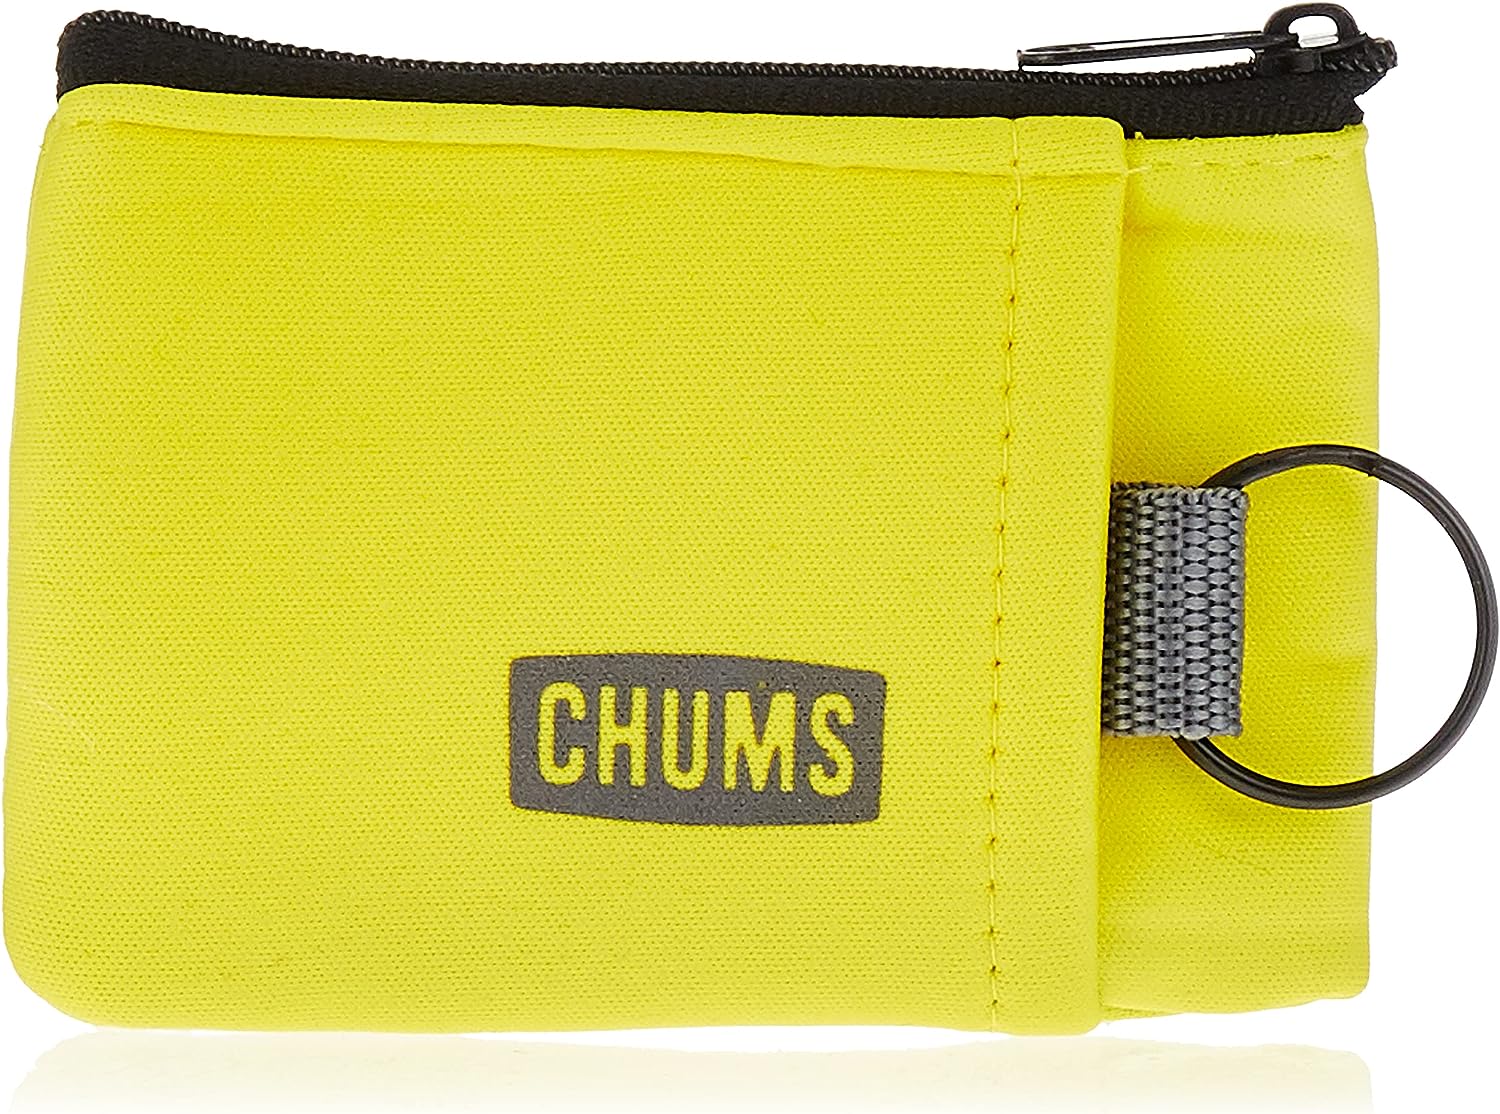 Chums Floating Marsupial Wallet Yellow Front View